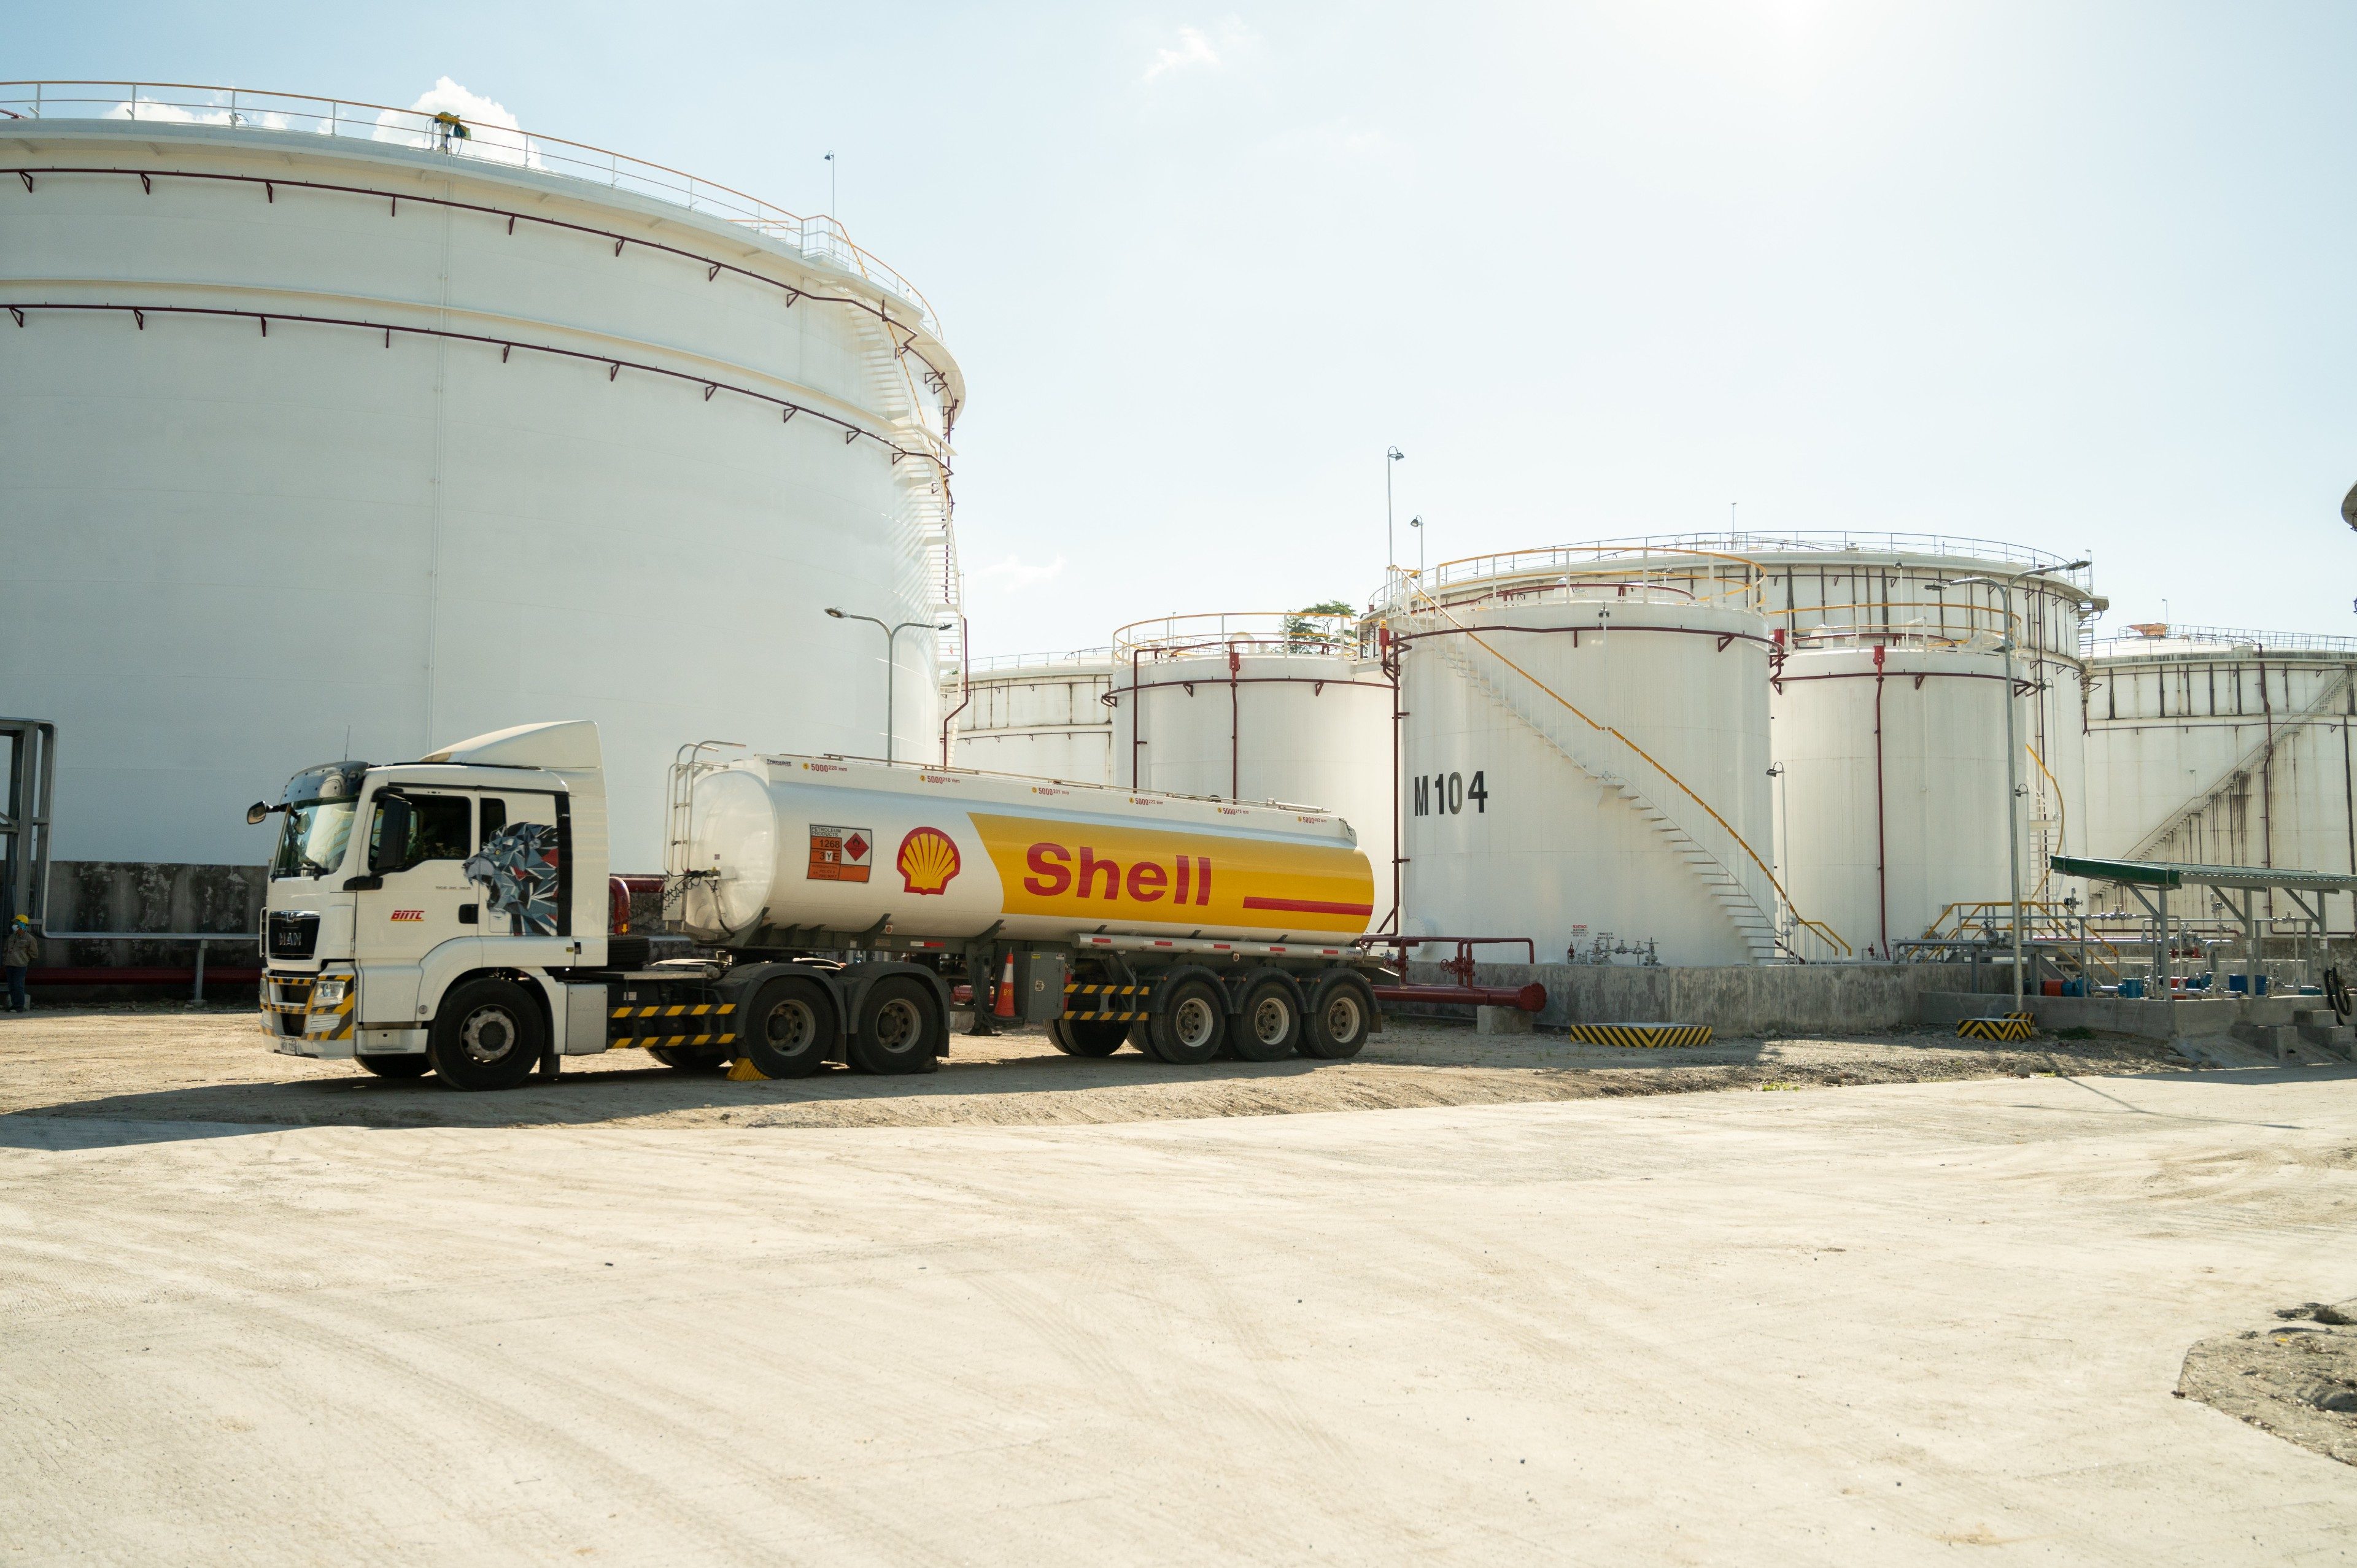 Pilipinas Shell’s new Subic facility aims to fuel Metro Manila, Northern and Central Luzon